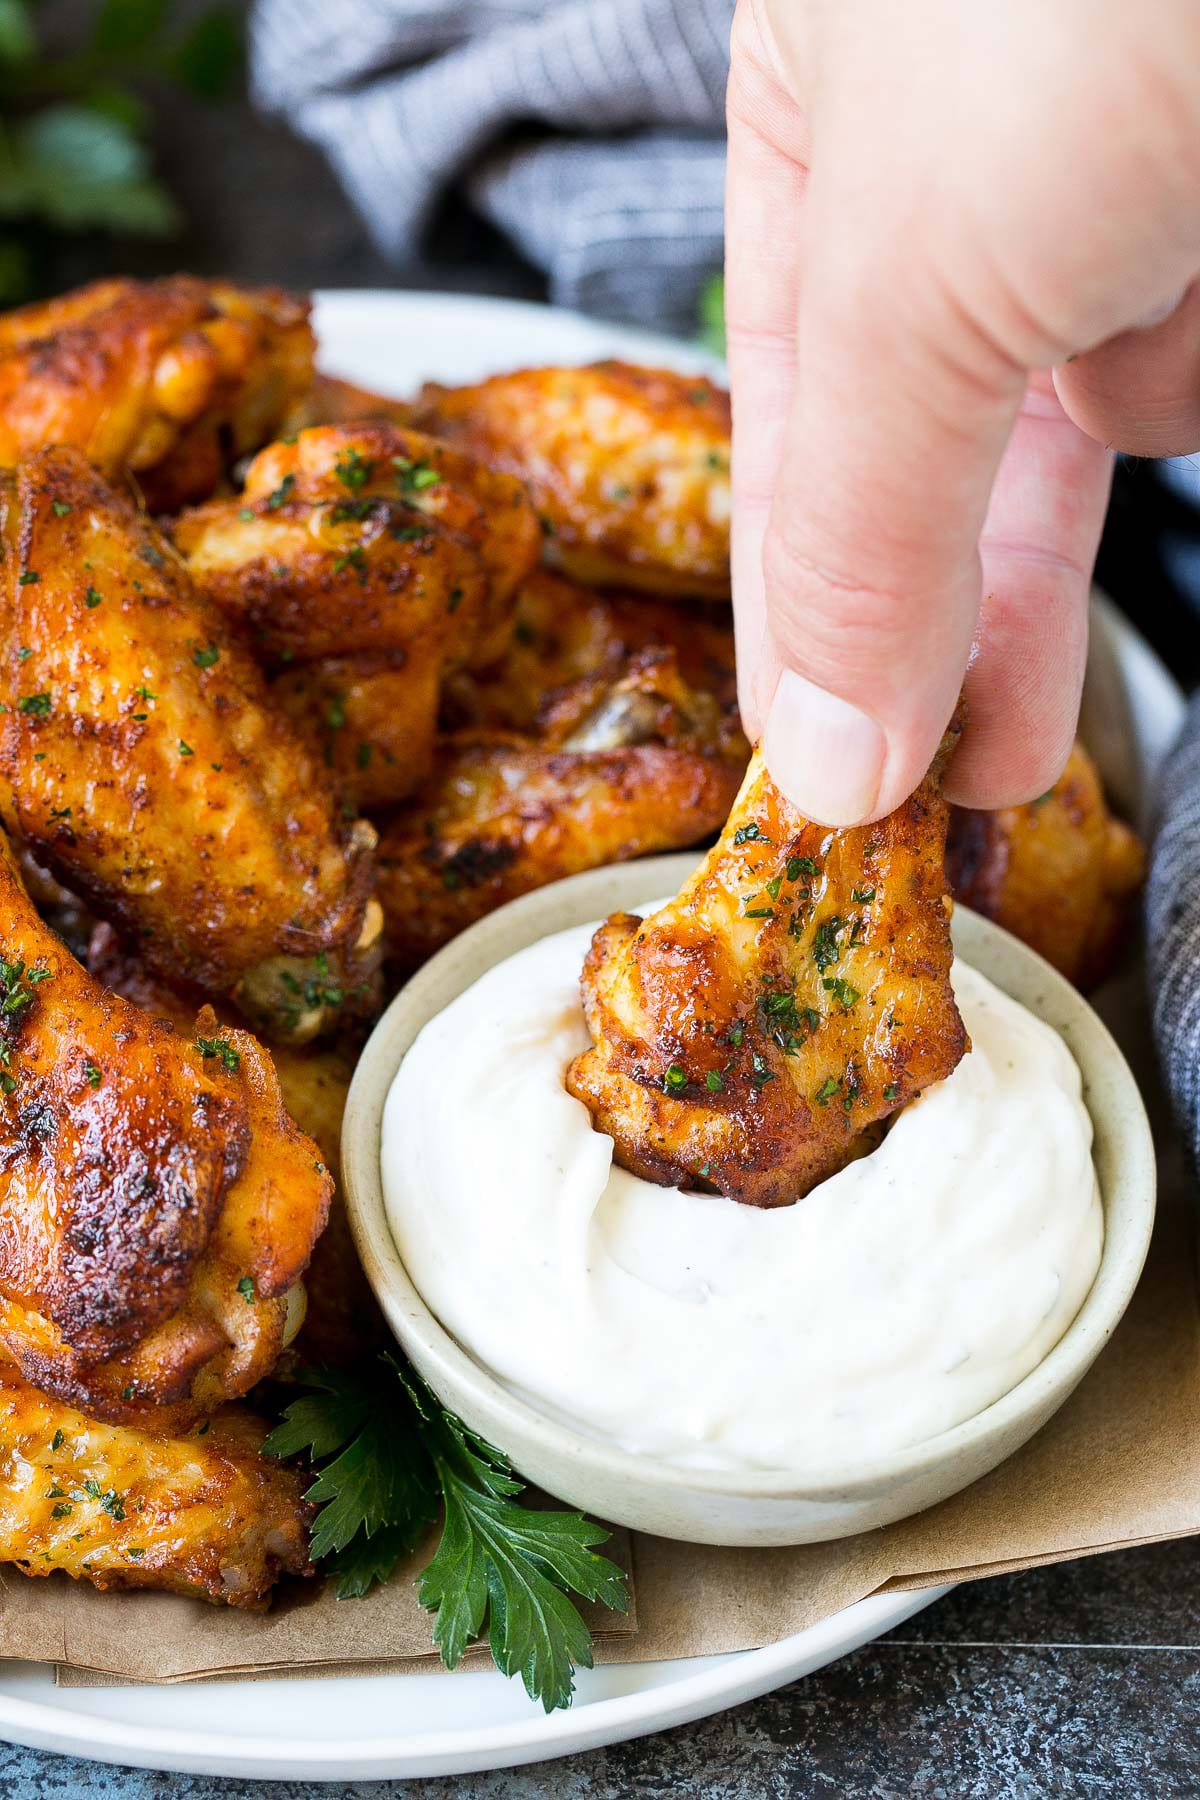 A hand dipping a chicken wing into ranch dip.